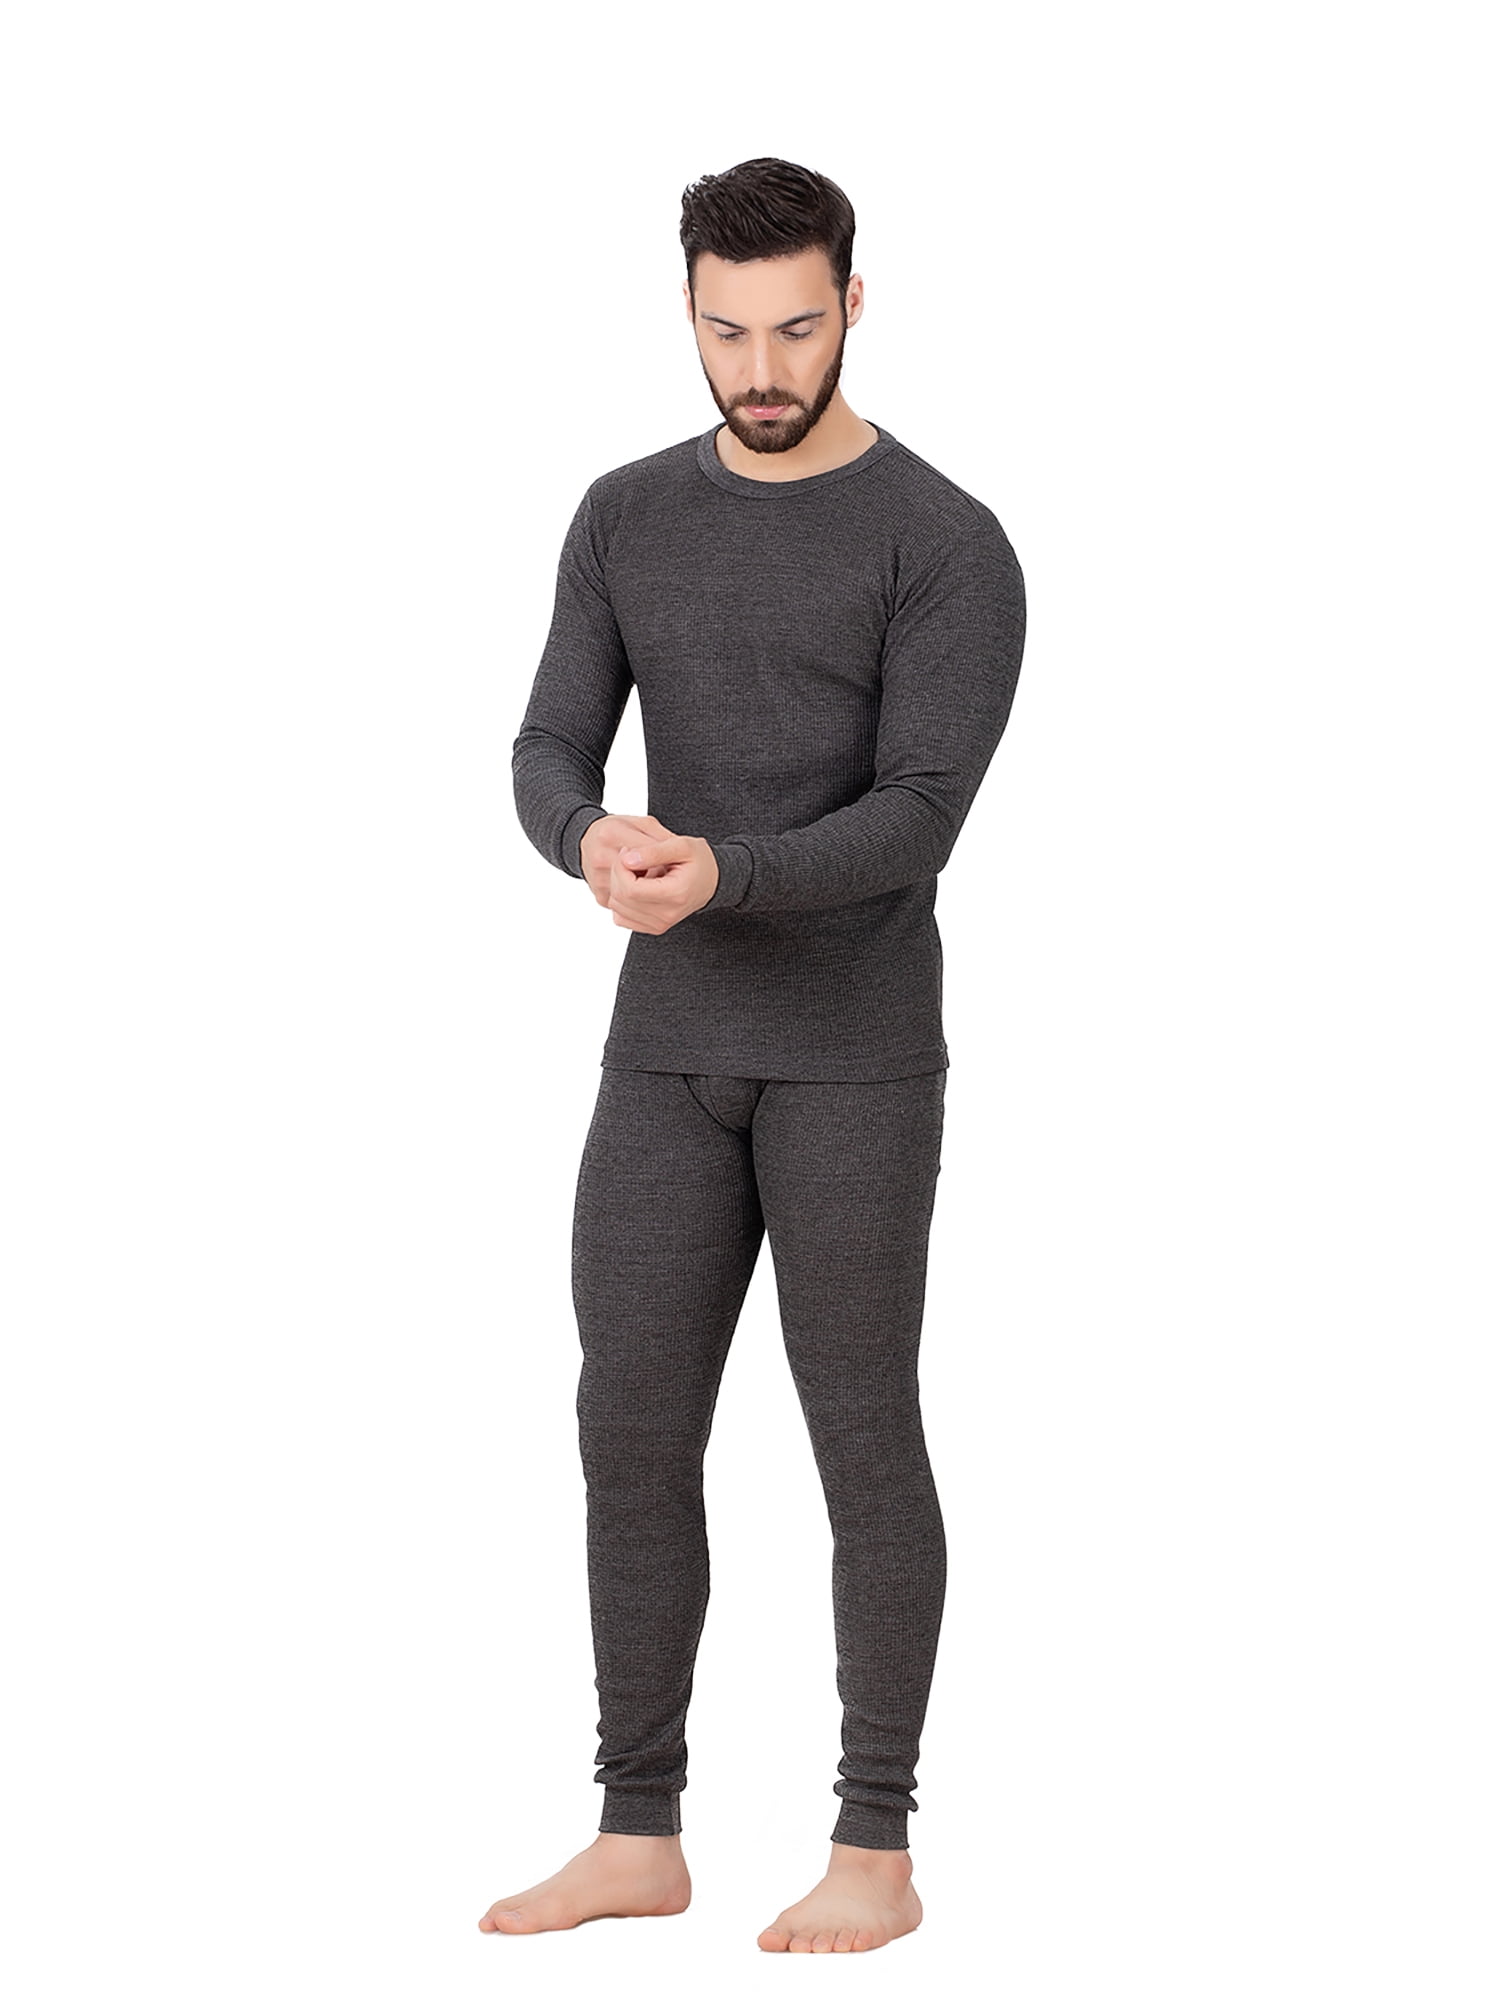 P&S Cotton Waffle Knit Thermal Underwear Set 2pc for Men Shirt